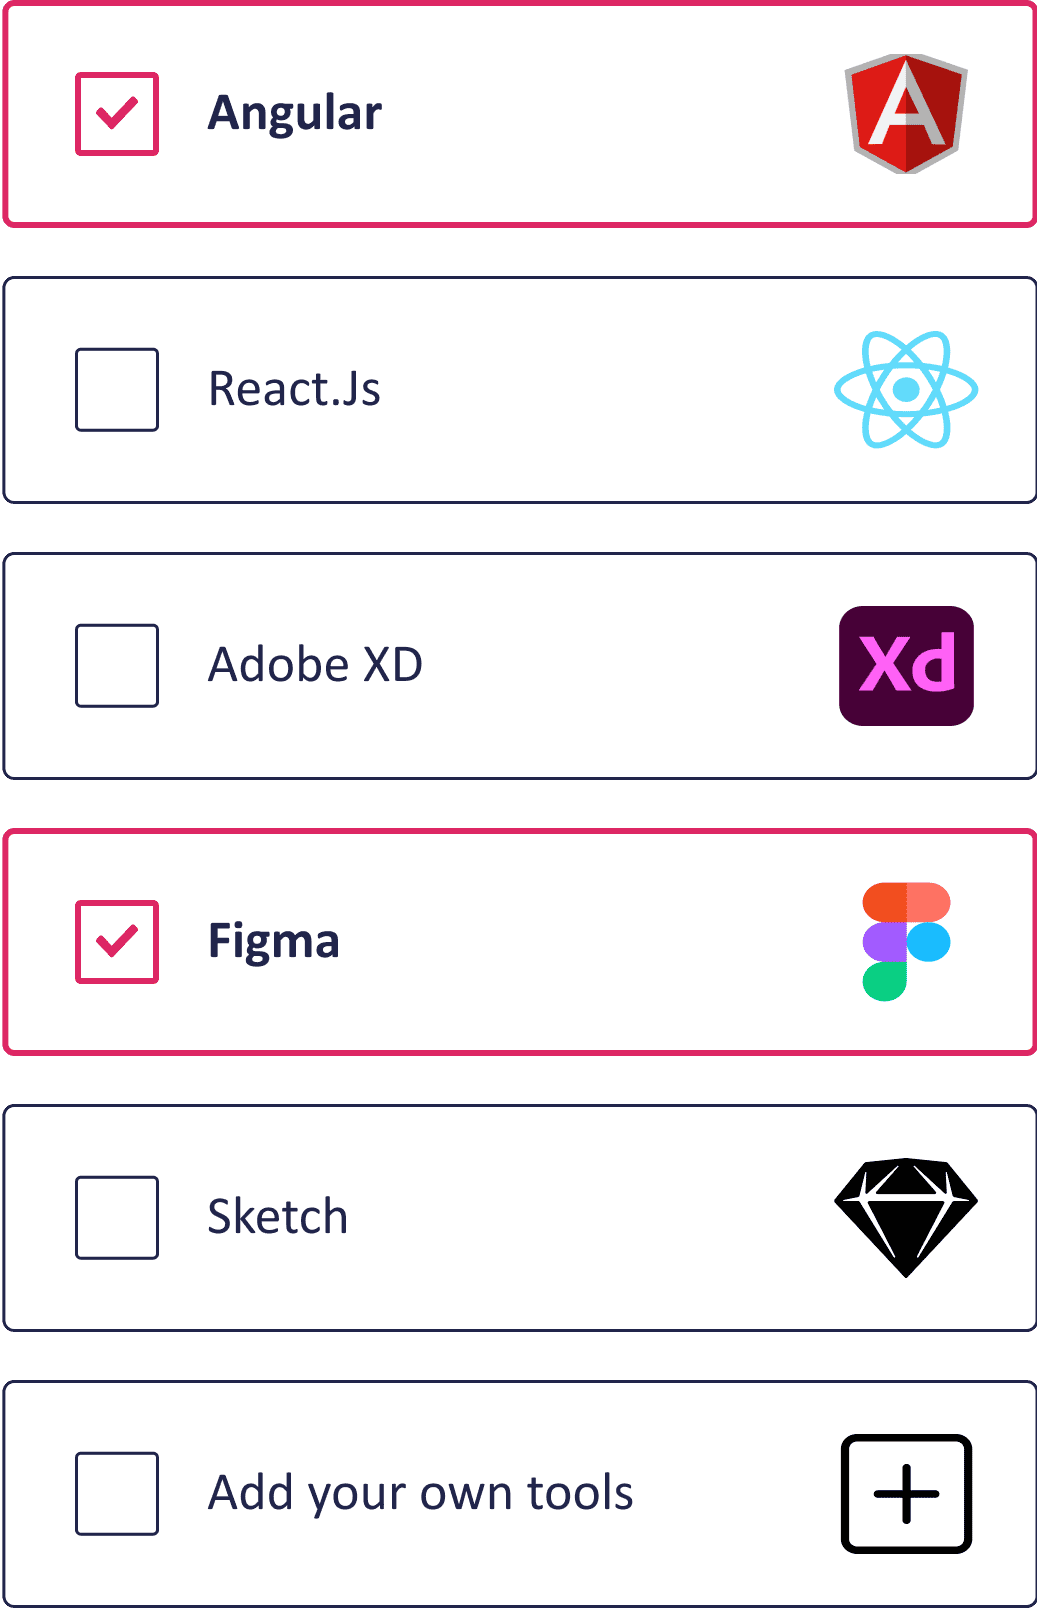 A checklist of different tools including Angular, React Js, Adobe XD, Figma, Sketch, and a custom tool